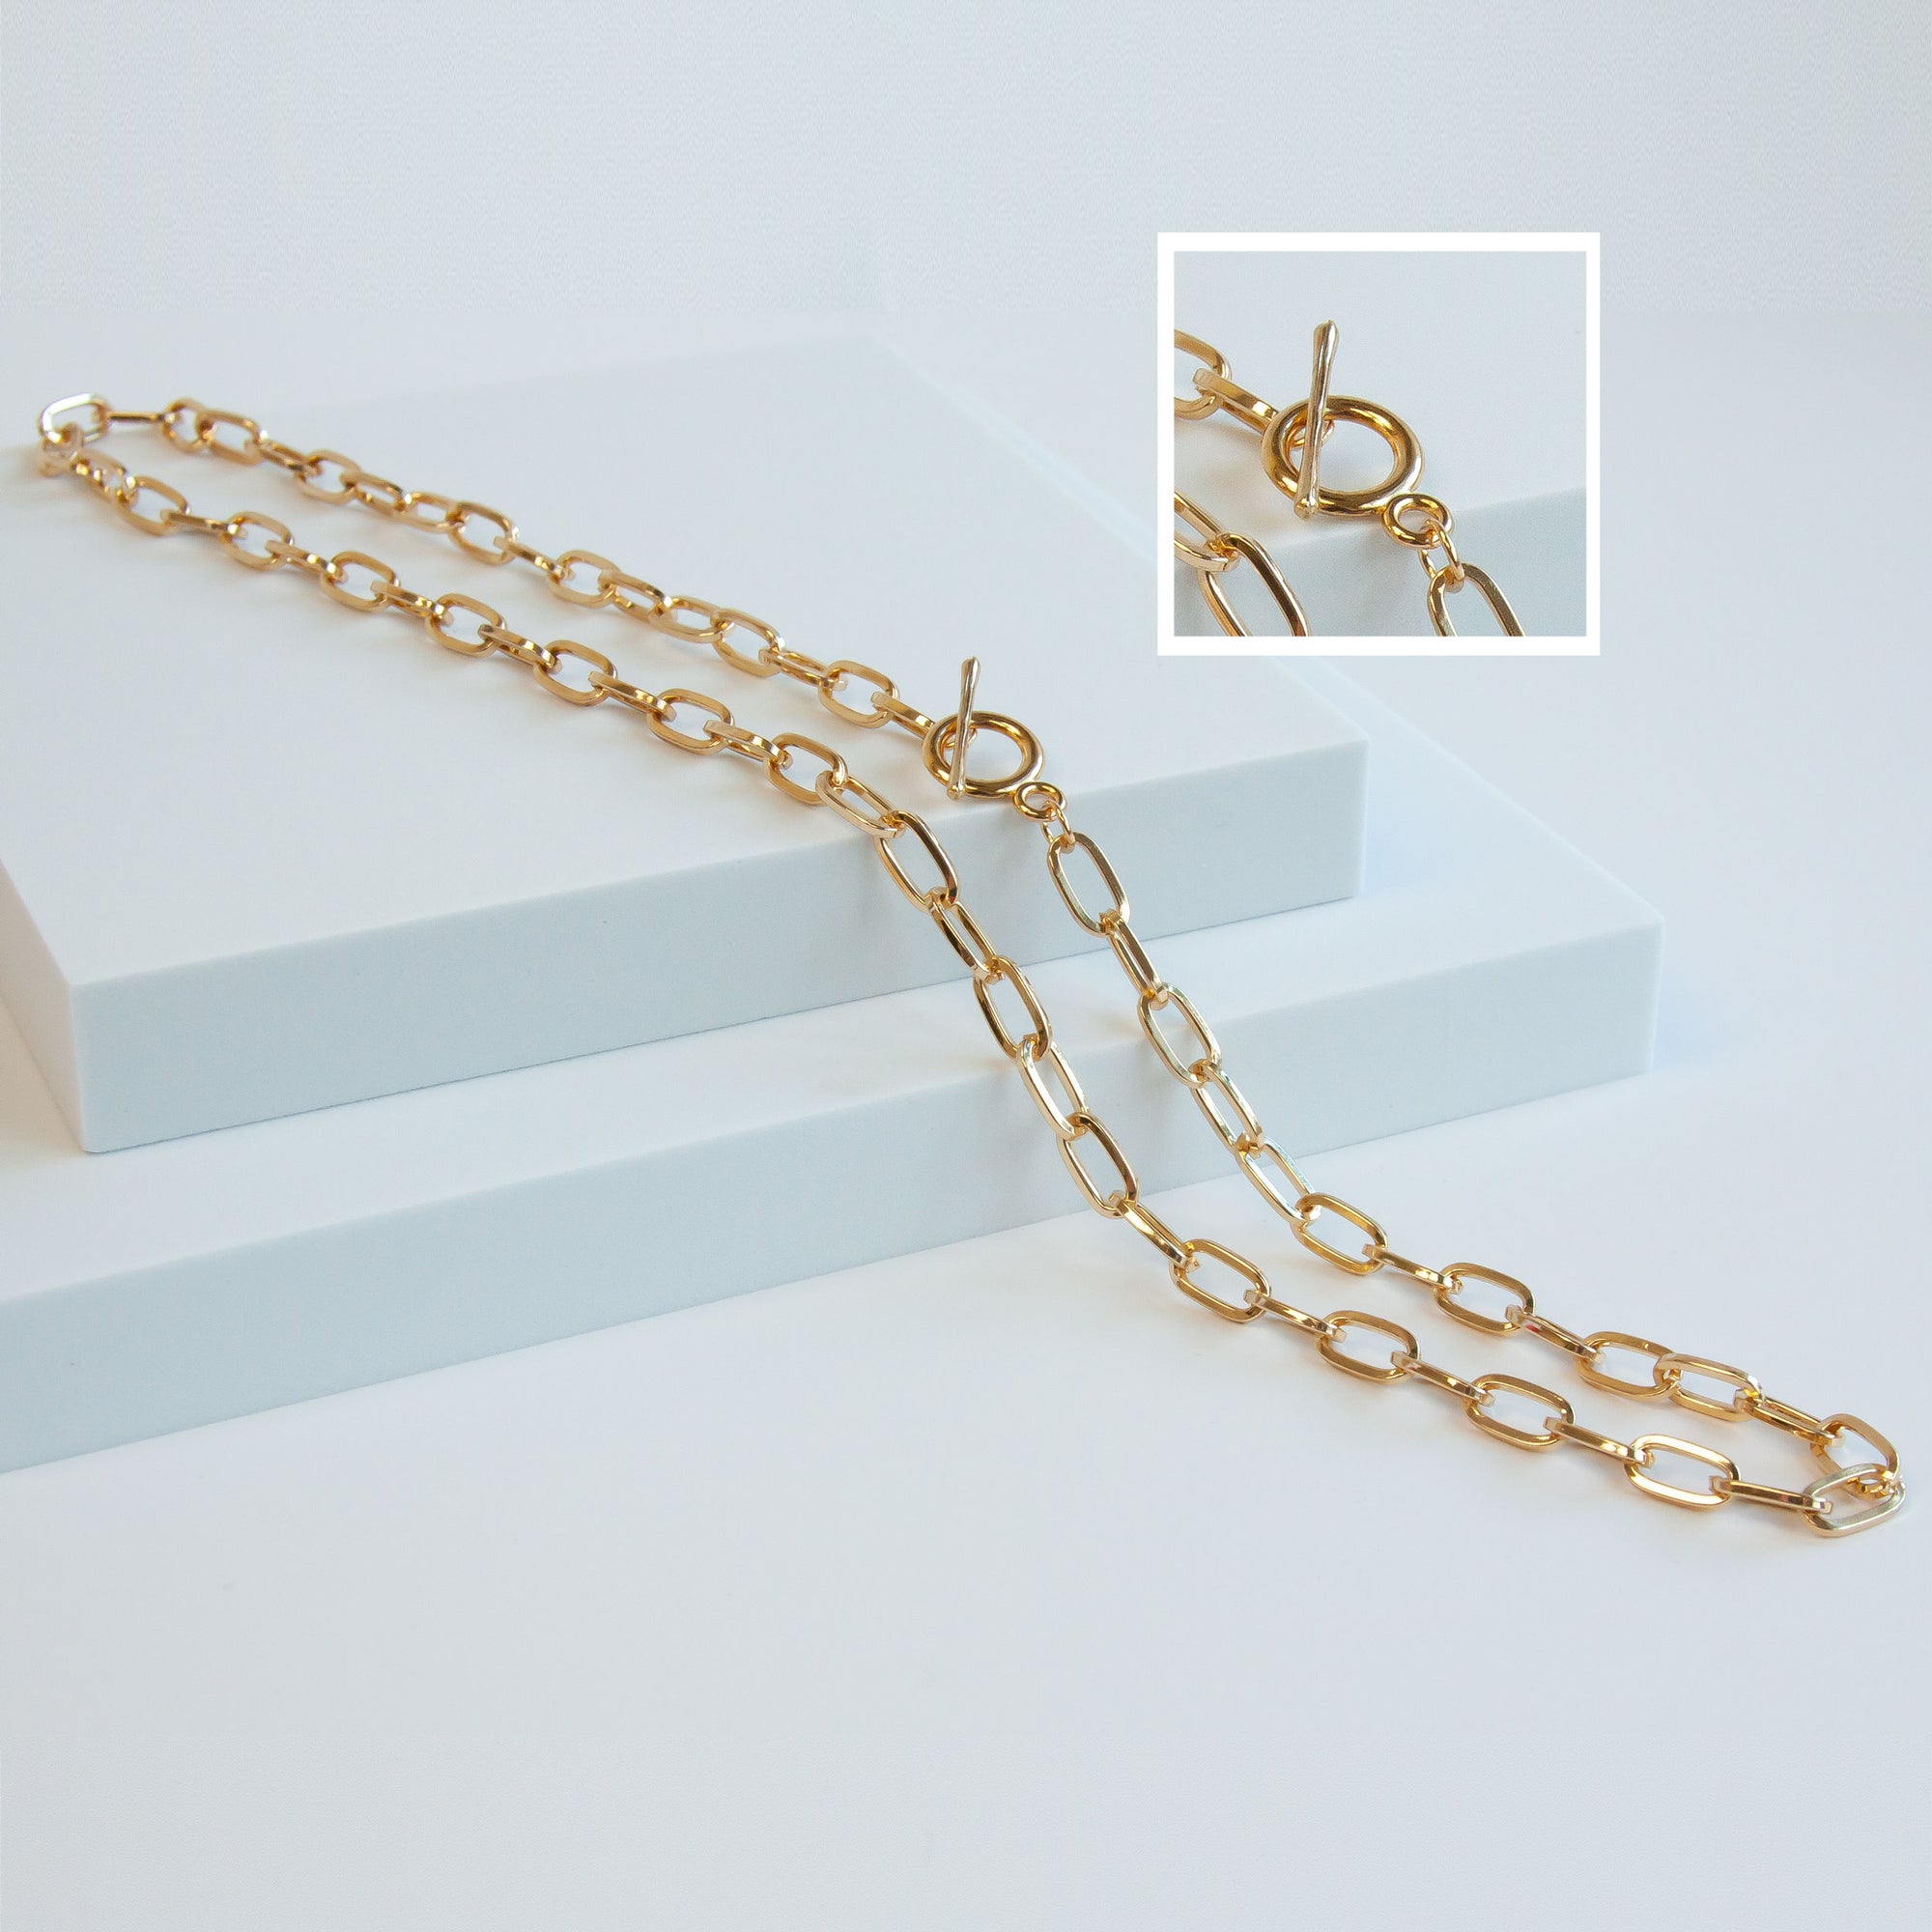 Gold Tone Base Metal Paperclip Chain with Toggle | Charles Albert Jewelry